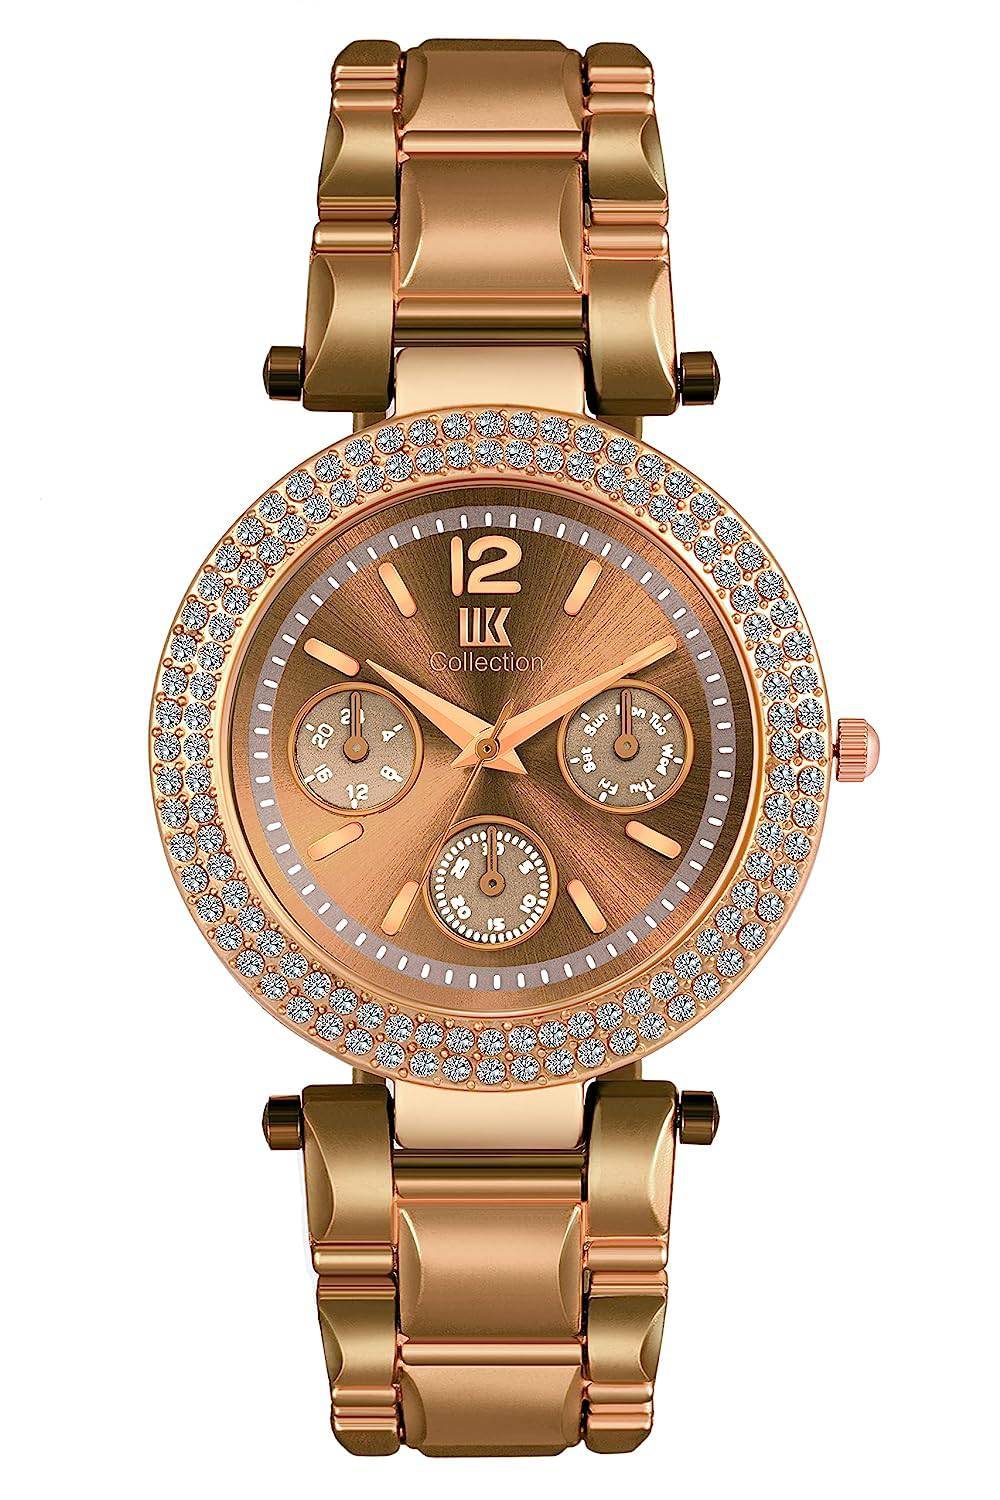 Watches for Women Round Studded Dial Girls watches |Analogue Quartz Movemnet Ladies Watch|Long Battery Life|Stainless Steel Adjustable Bracelet Chain Strap|Double Lock Clasp Safety Watches for Girls. - YuvaFlowers